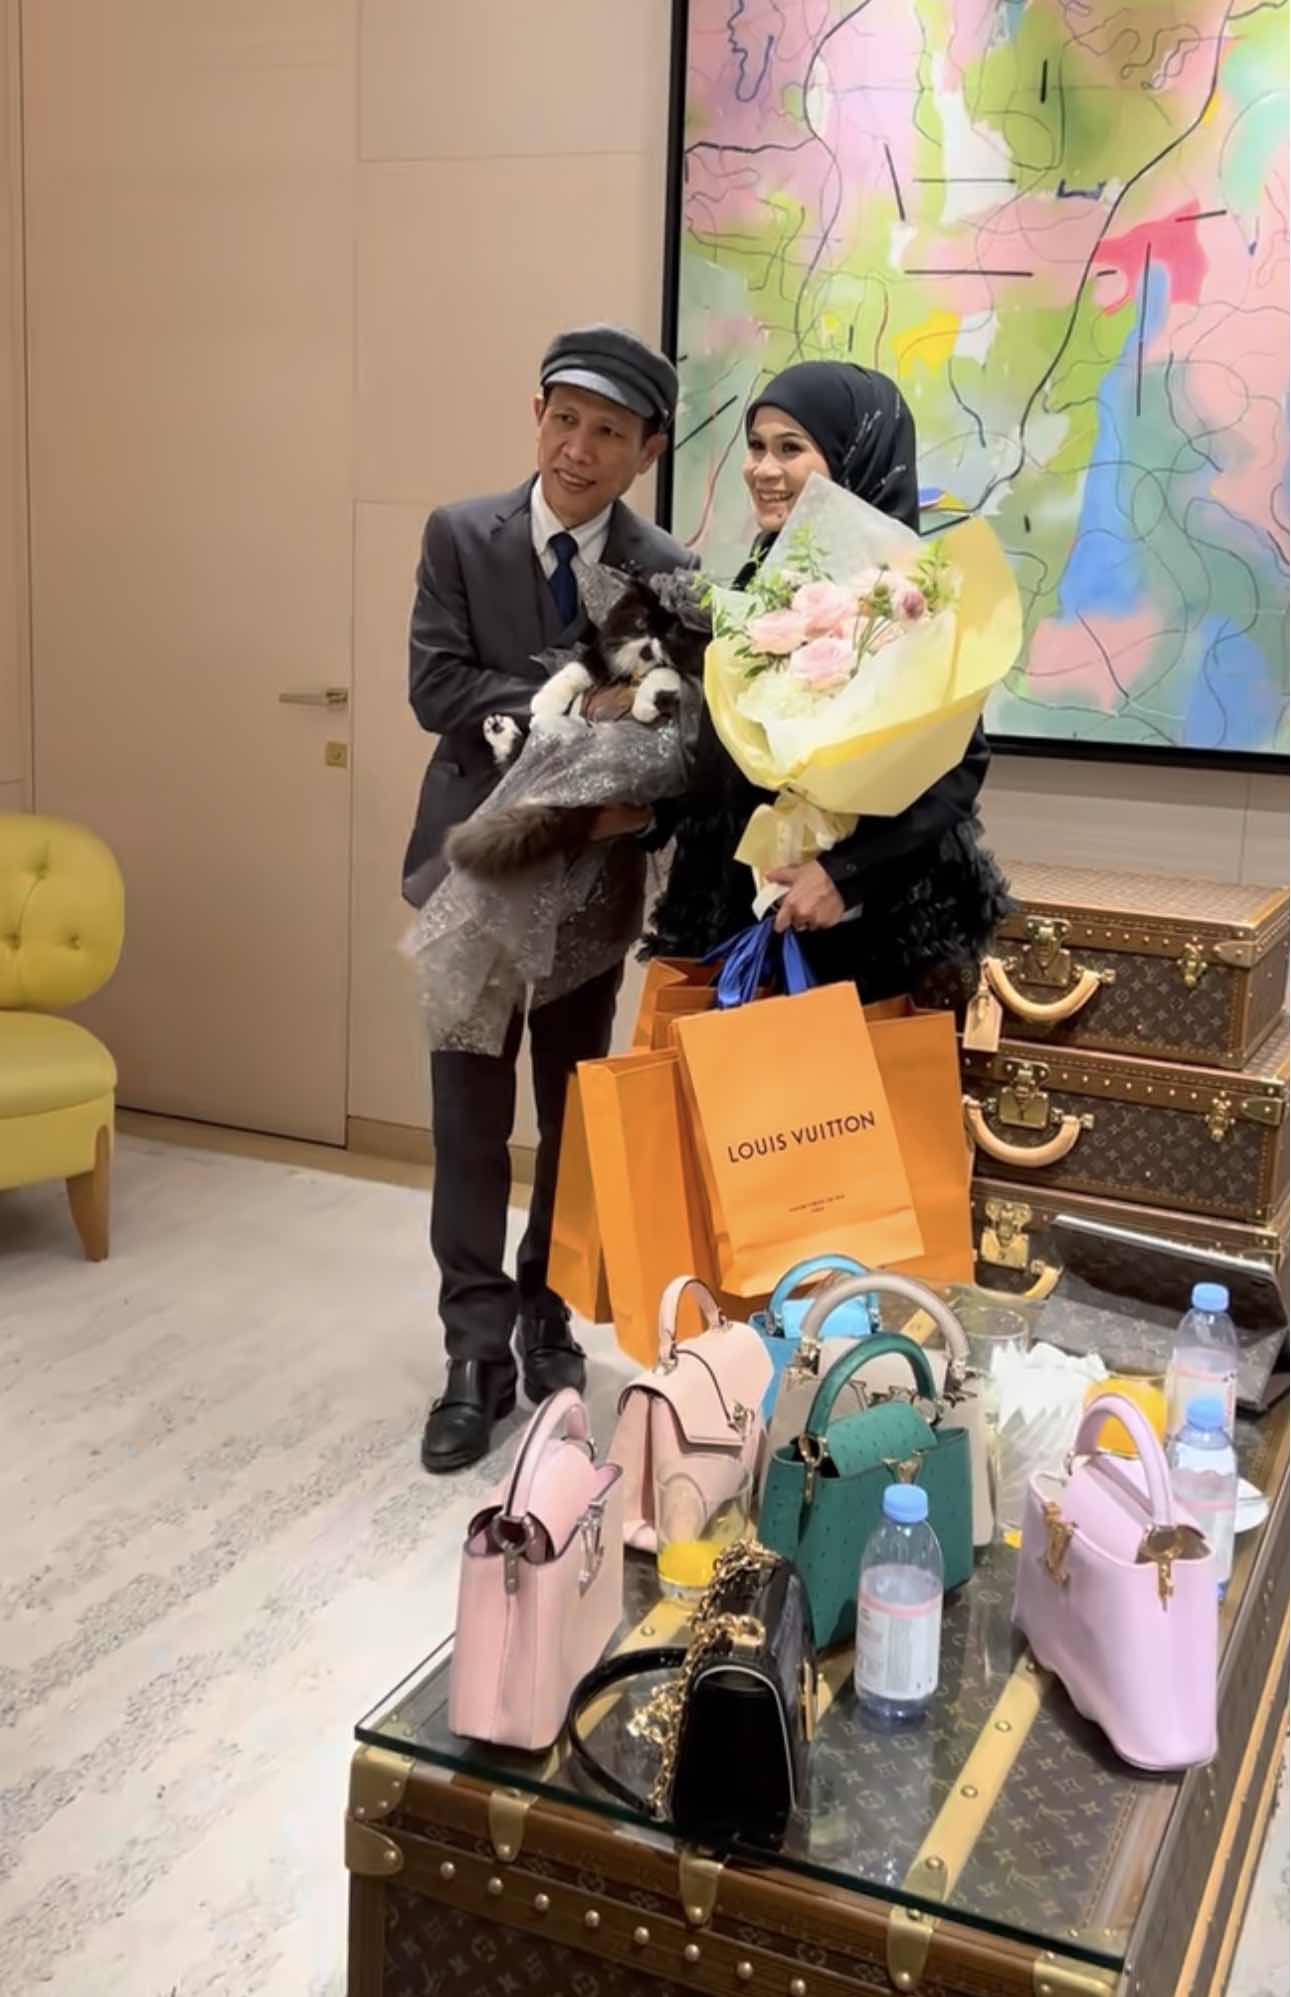 Cat's family taking pictures with the gifts and a bouquet